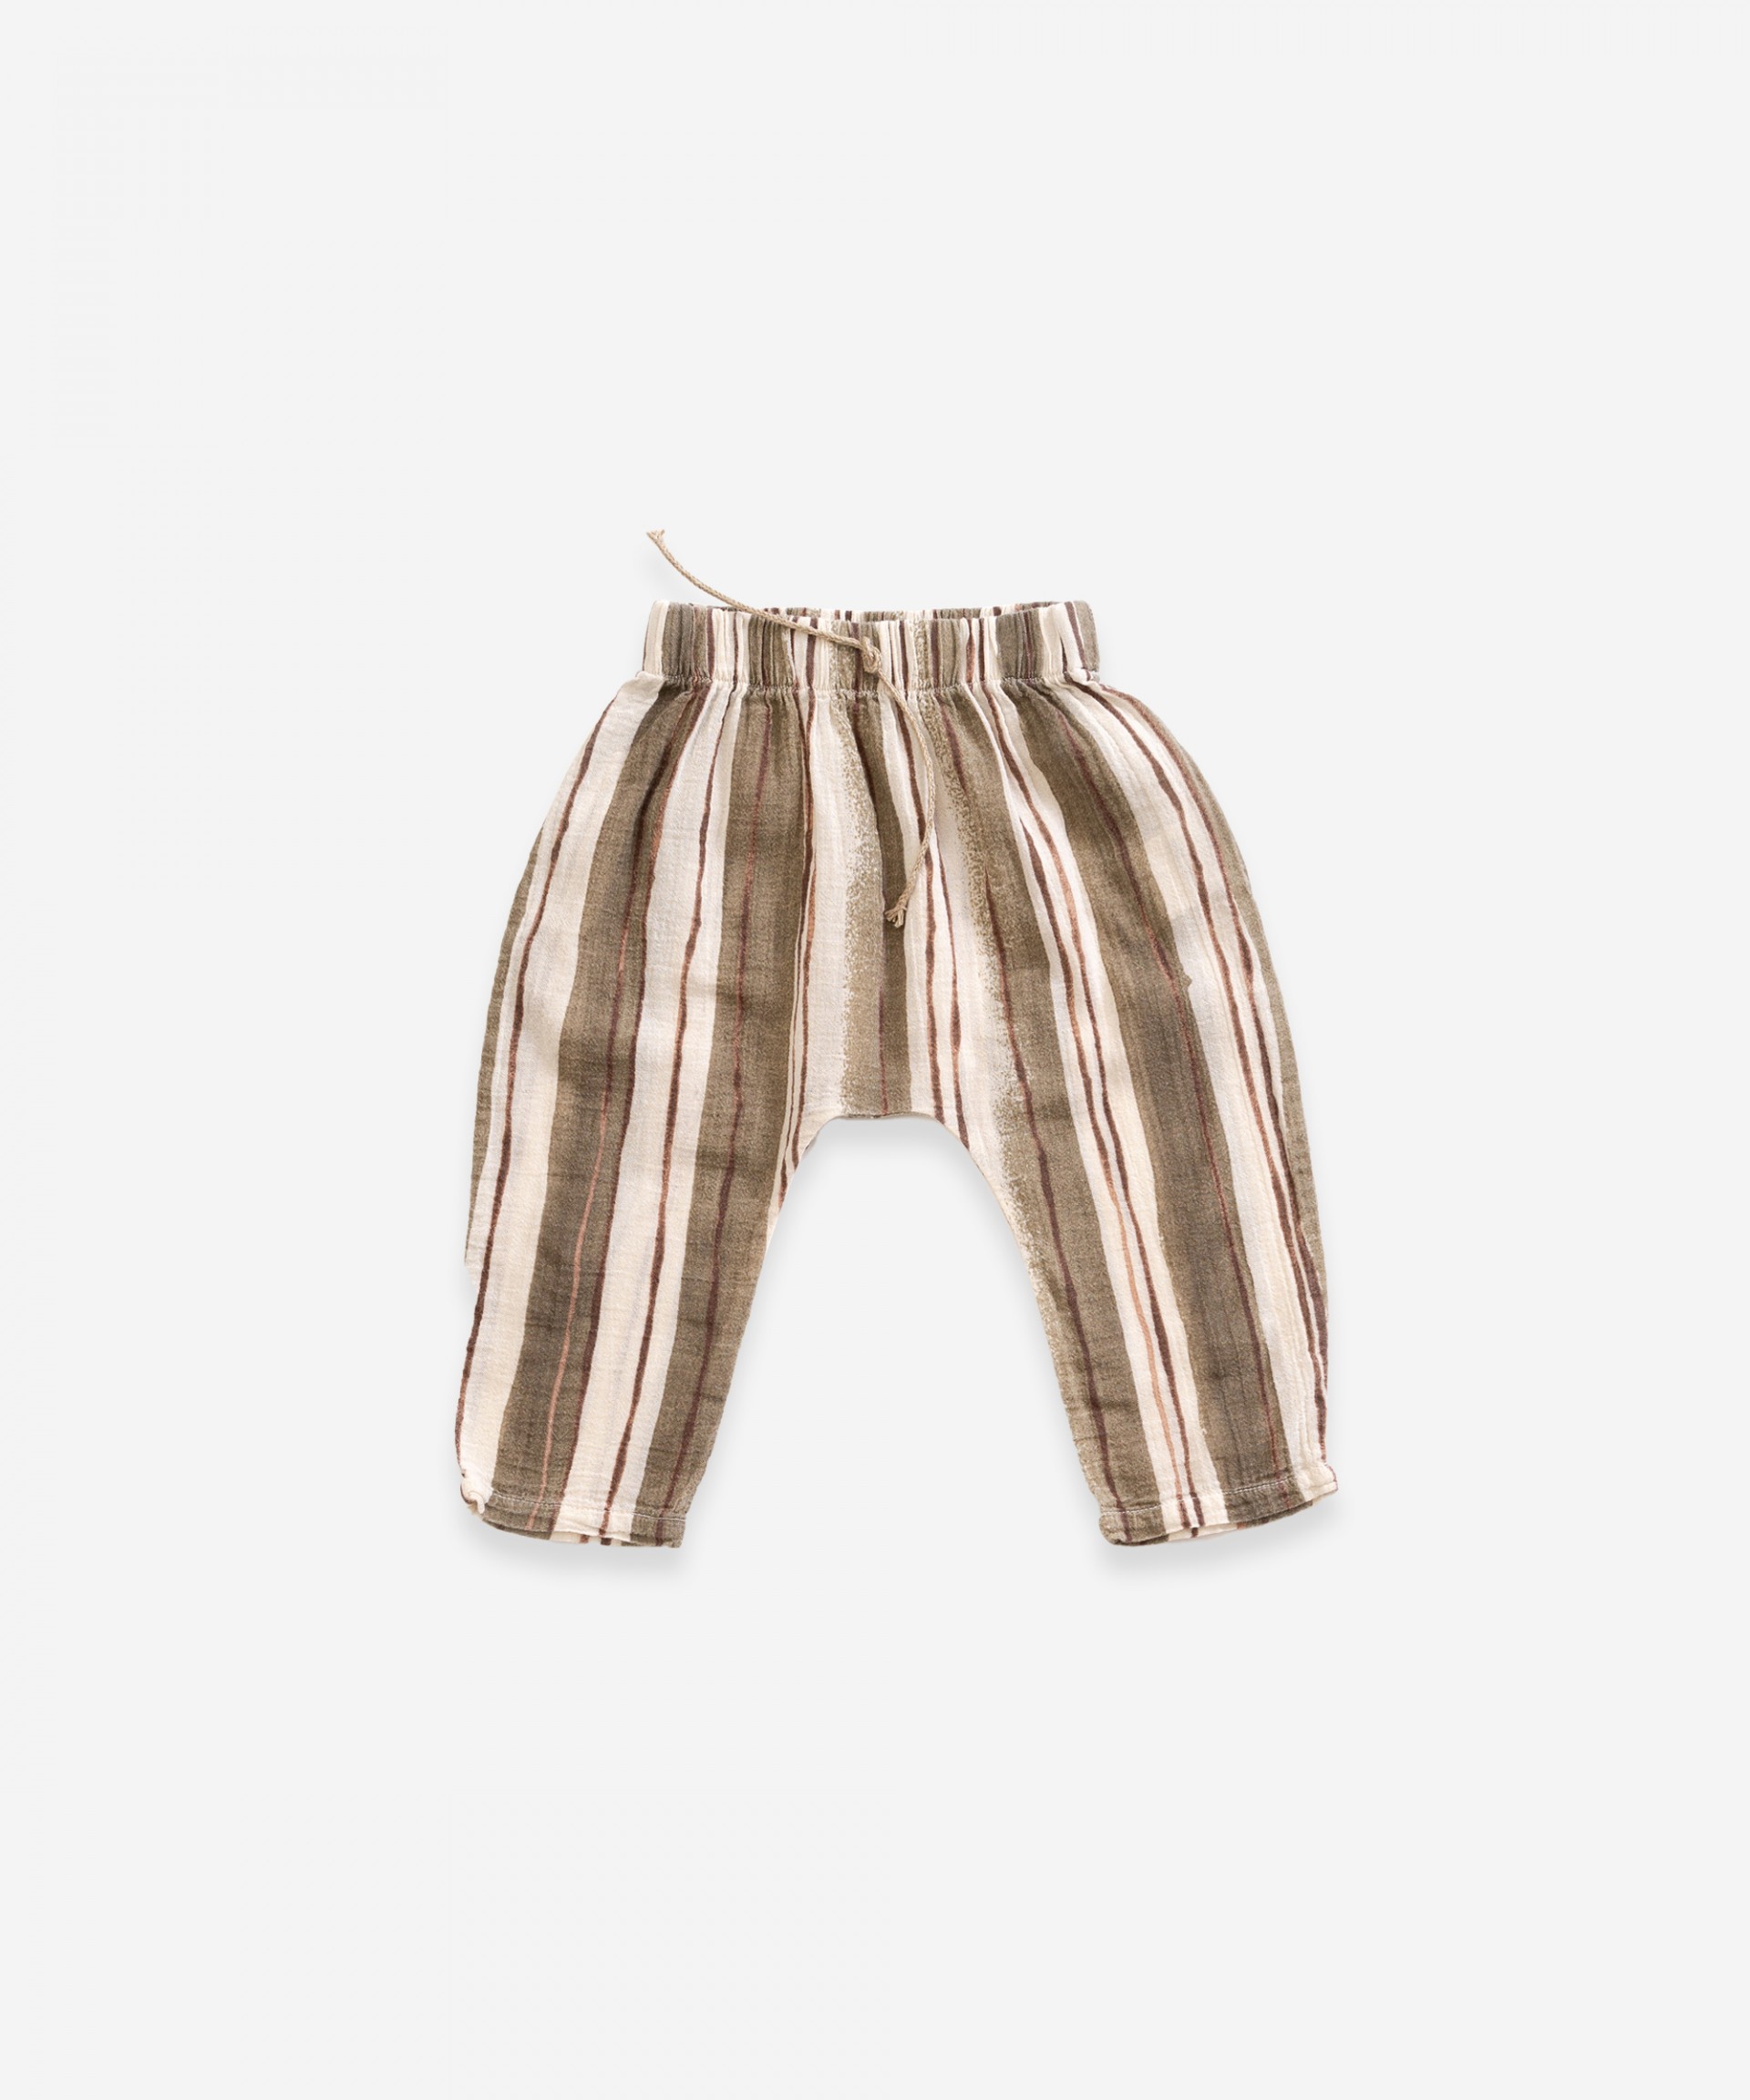 Striped cotton trousers | Weaving